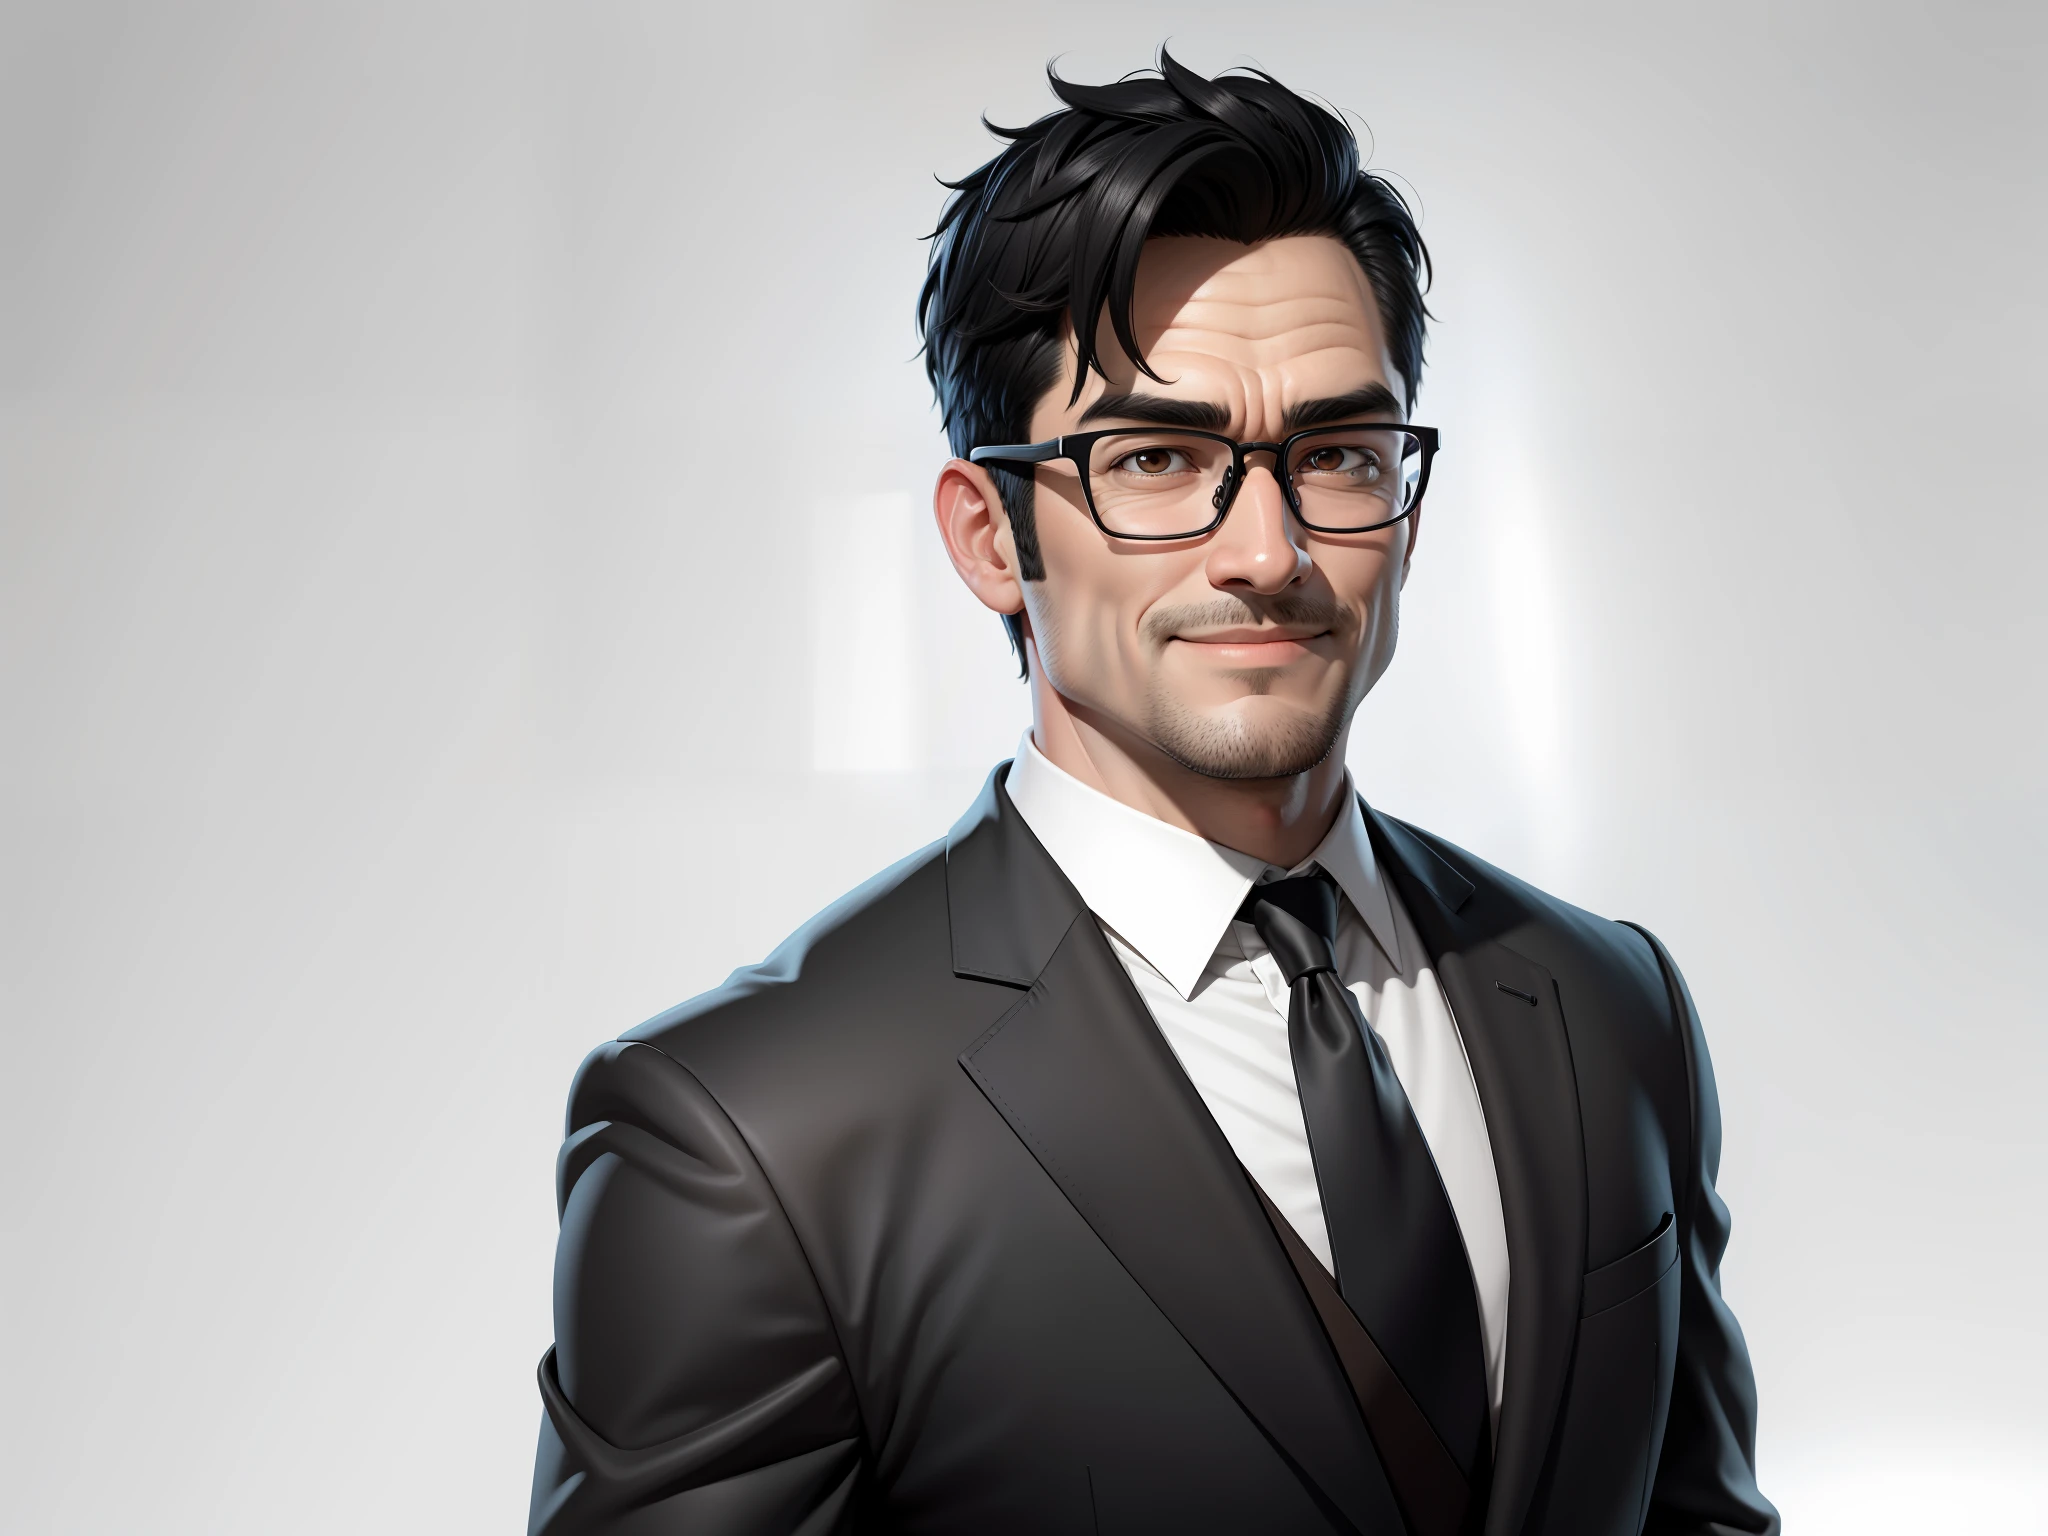 Super young man 35 years old, silver glasses, slightly chubby face, clean face, no beard on chin, black super short hair, black eyes, black suit, blue tie, confident smile, digital painting, film, 3D character design by Mark Clairedon and Pixar and Hayao Miyazaki, the illustration is a high-definition illustration in 4K resolution with very detailed facial features and cartoon-style visuals.